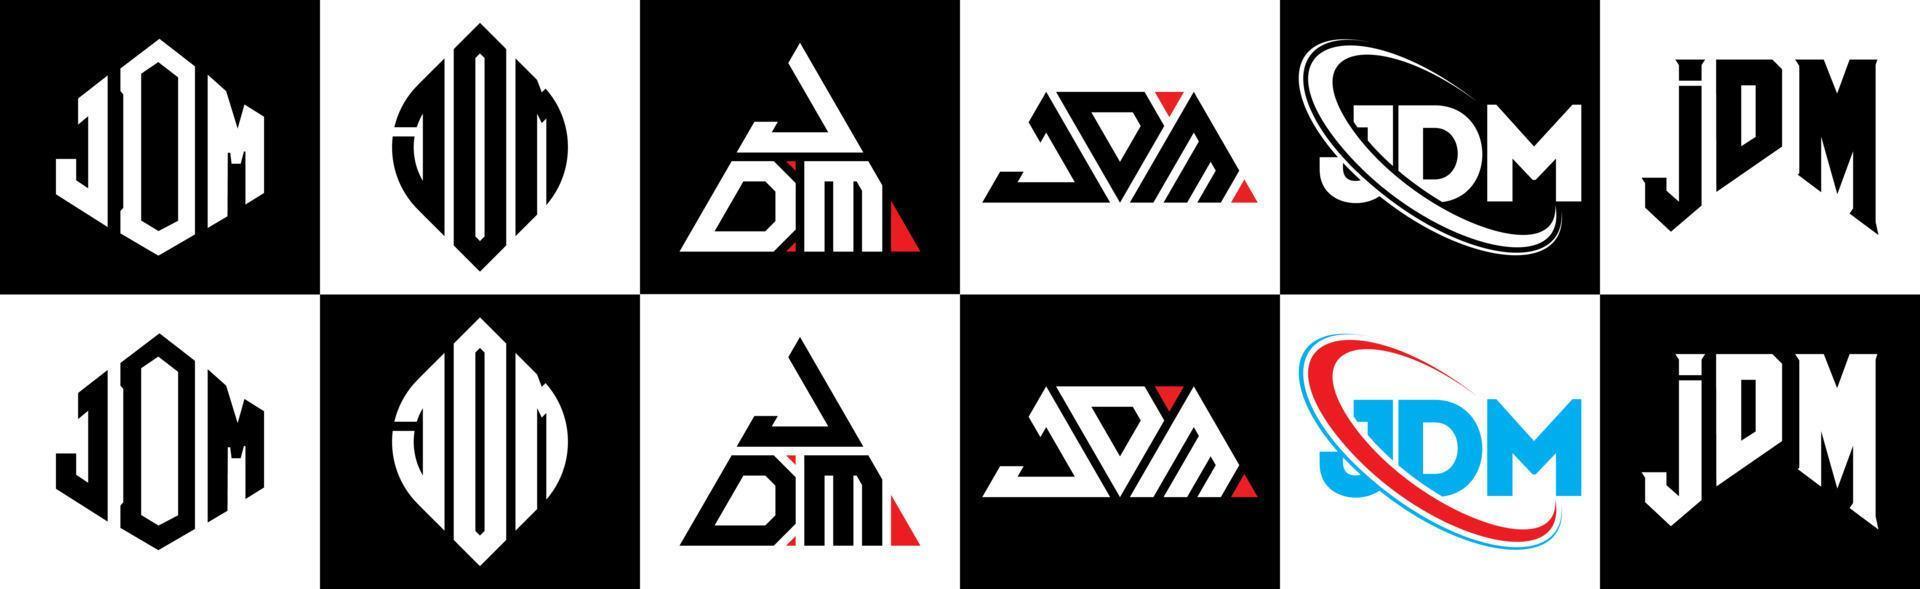 JDM letter logo design in six style. JDM polygon, circle, triangle, hexagon, flat and simple style with black and white color variation letter logo set in one artboard. JDM minimalist and classic logo vector